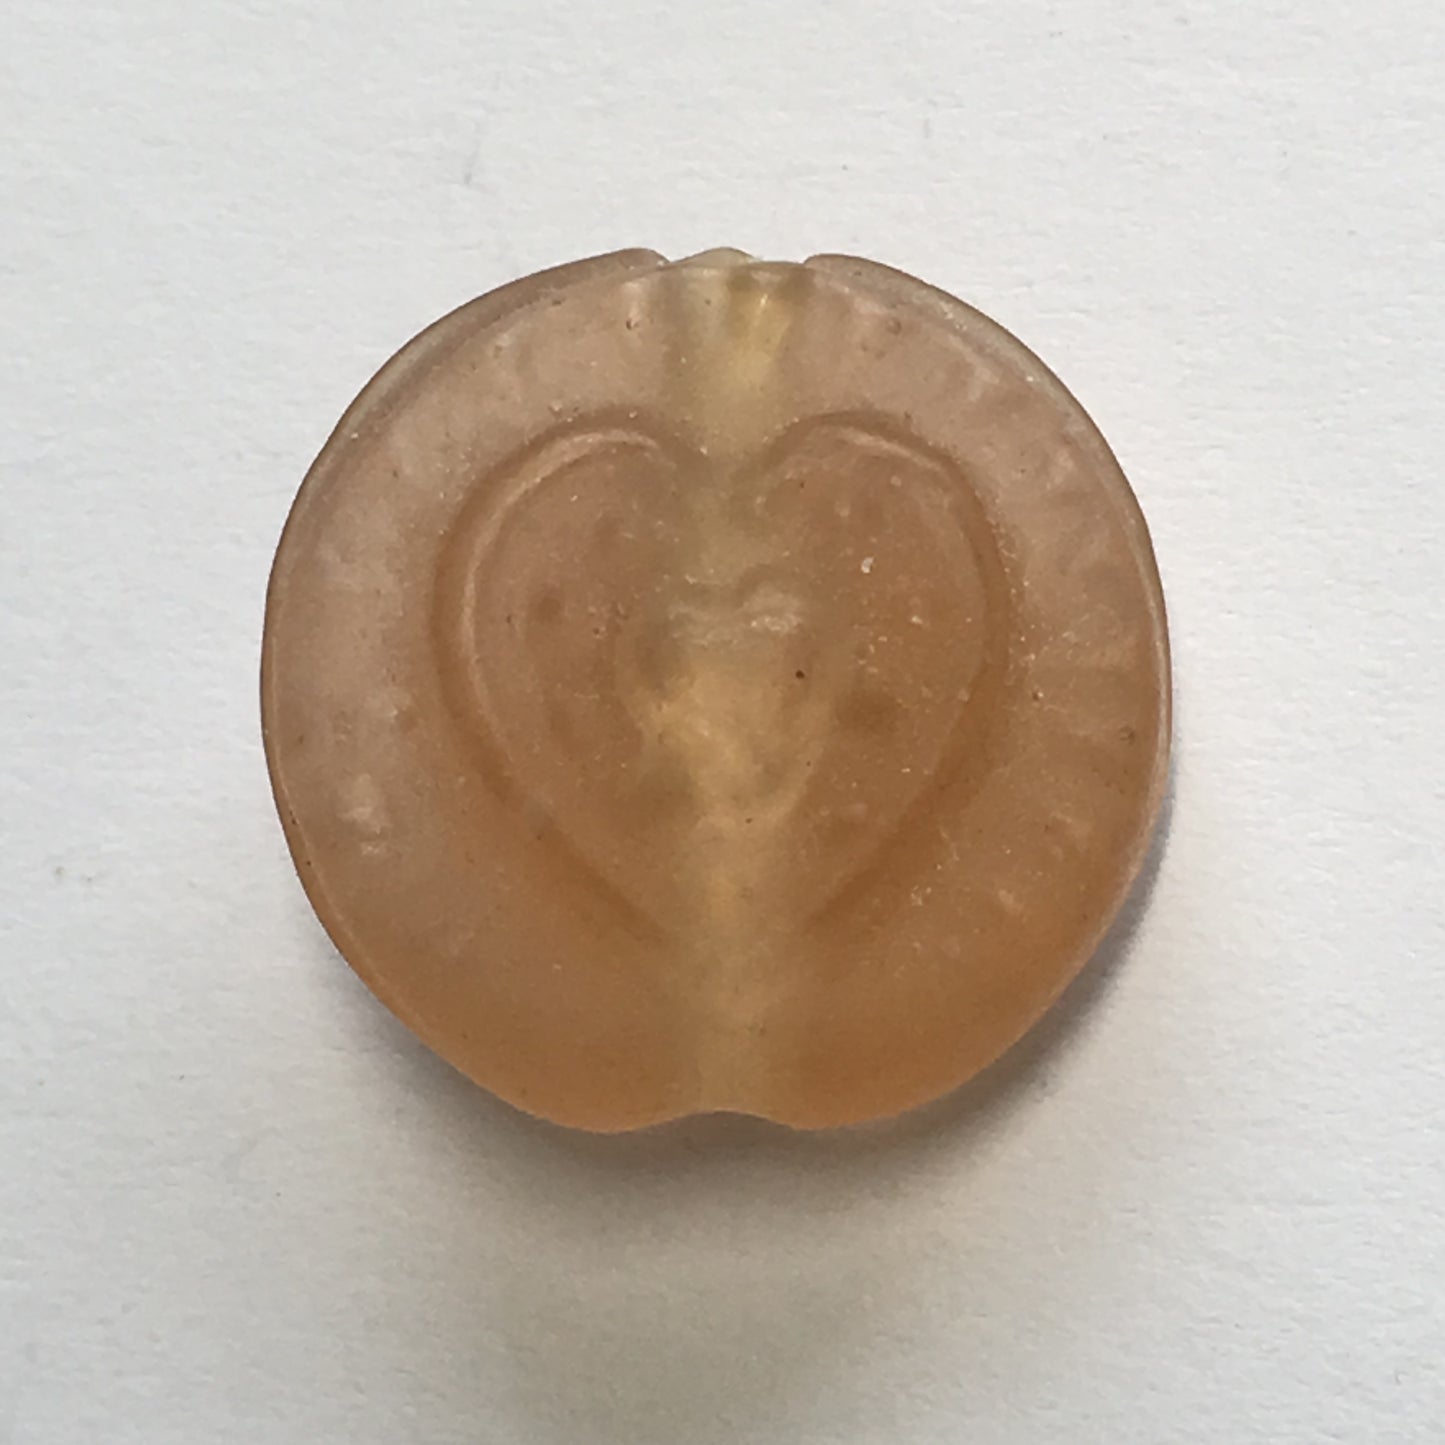 Light Orange Lampwork Glass Frosted Heart Stamped Coin Focal Bead, 17 mm, 9 mm Thick